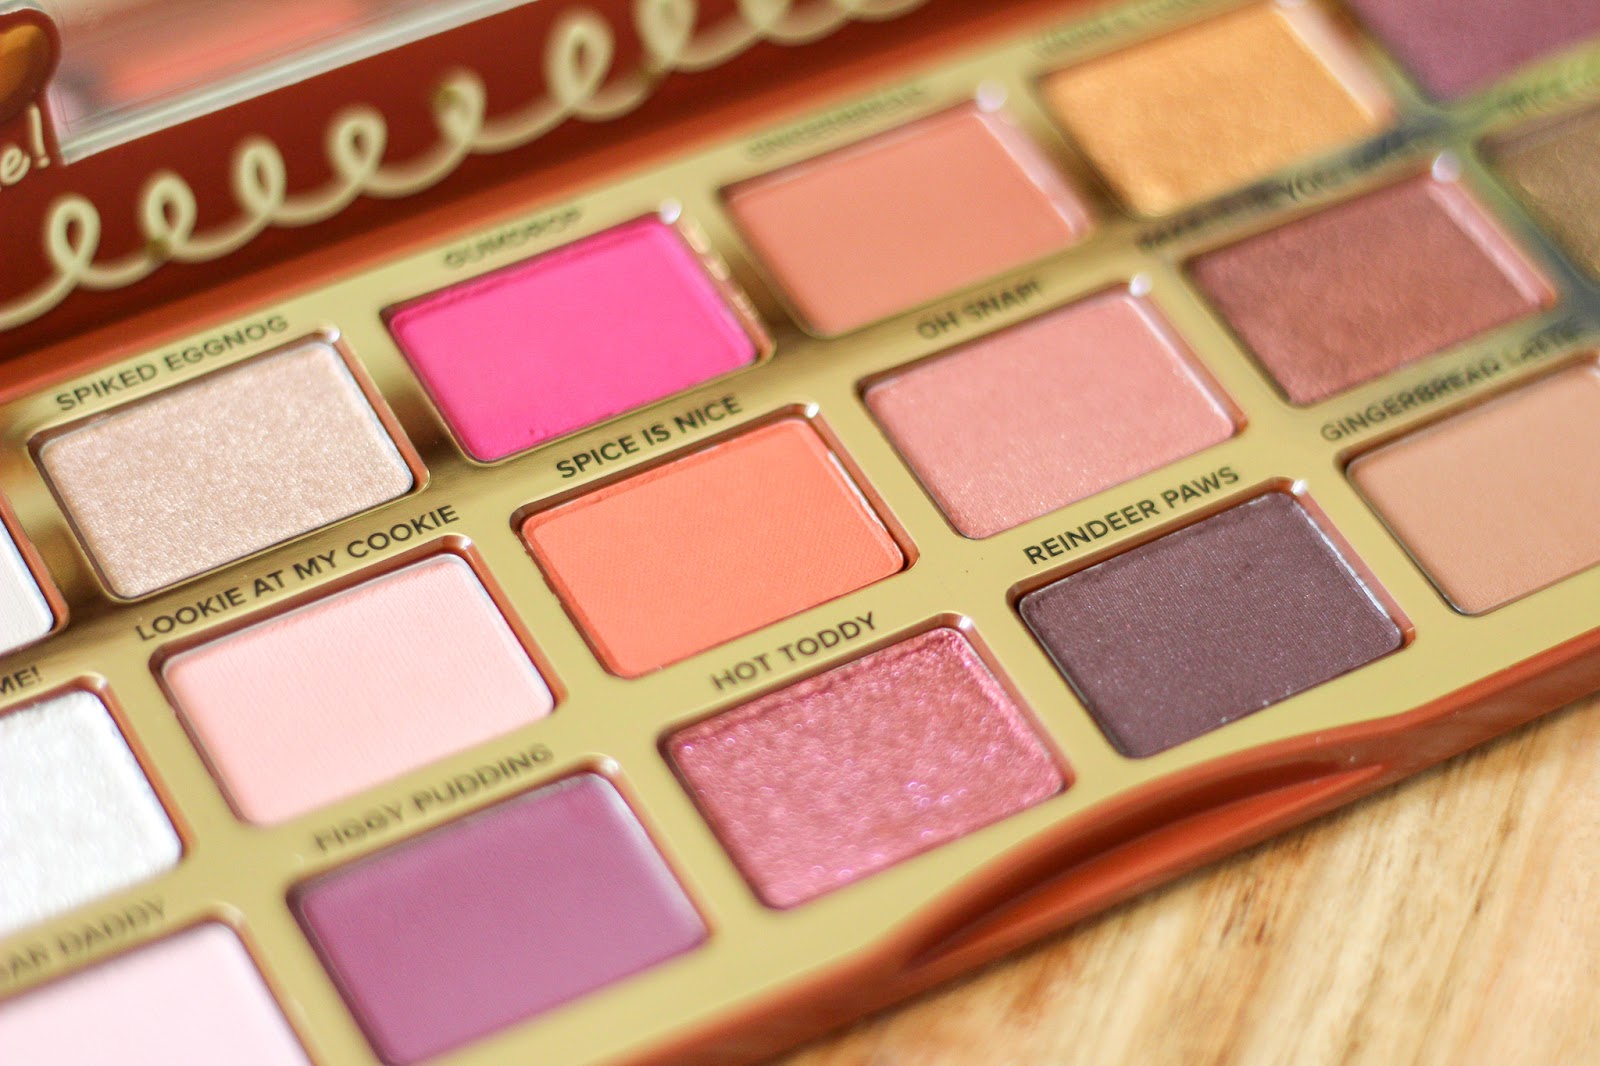 Too Faced Gingerbread Spice Palette.